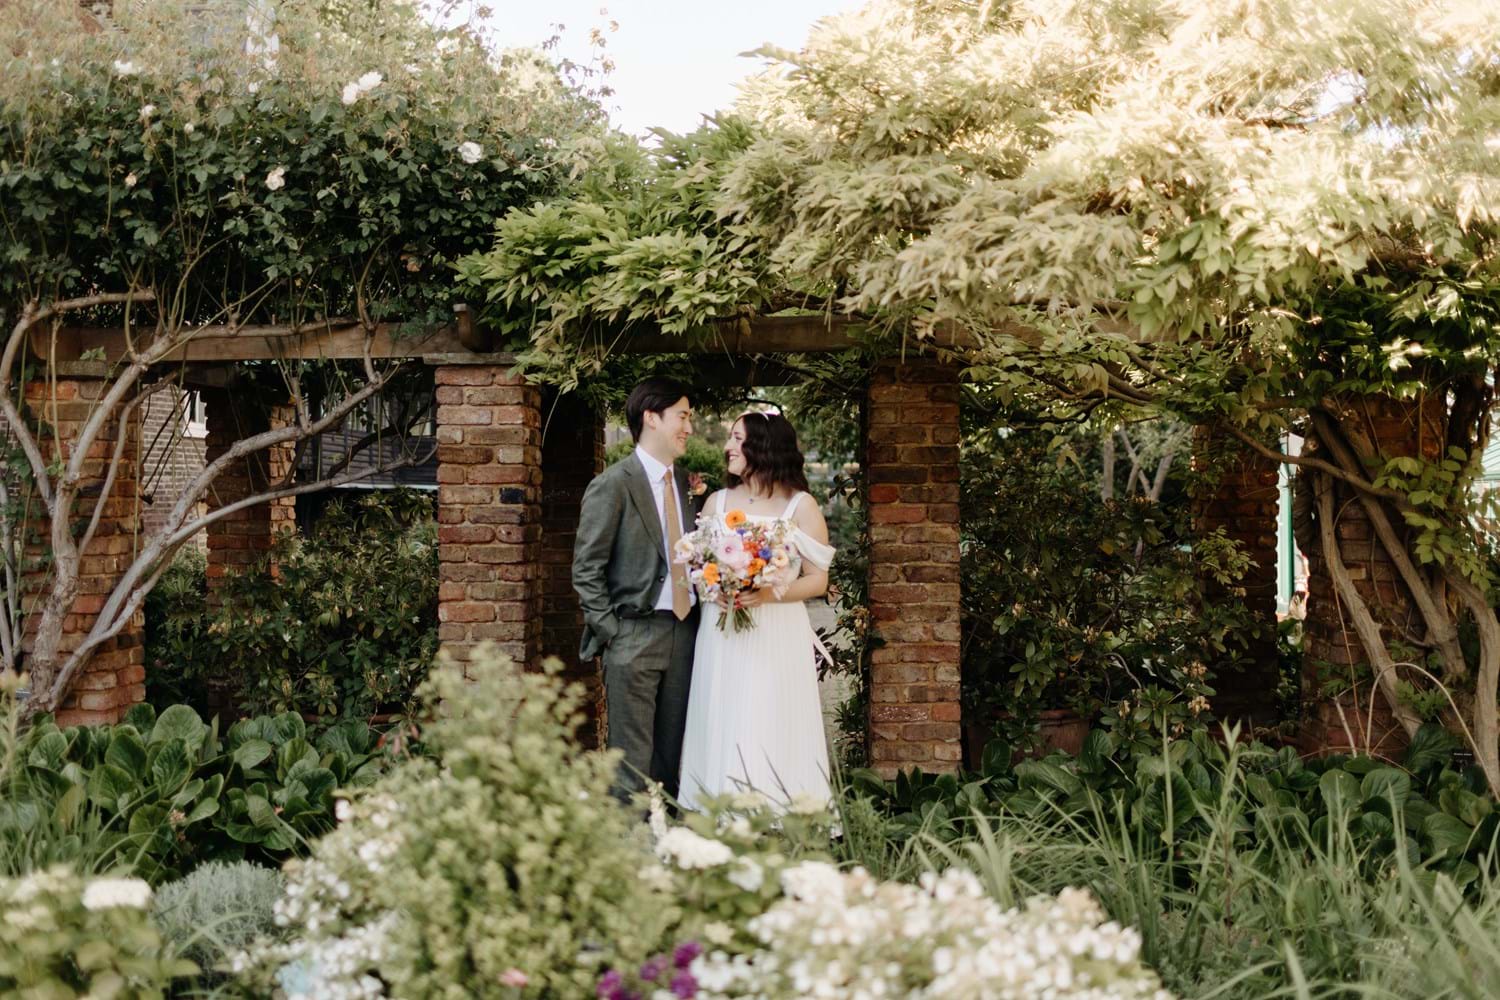 A couple getting married under an arch made of bricks and plants